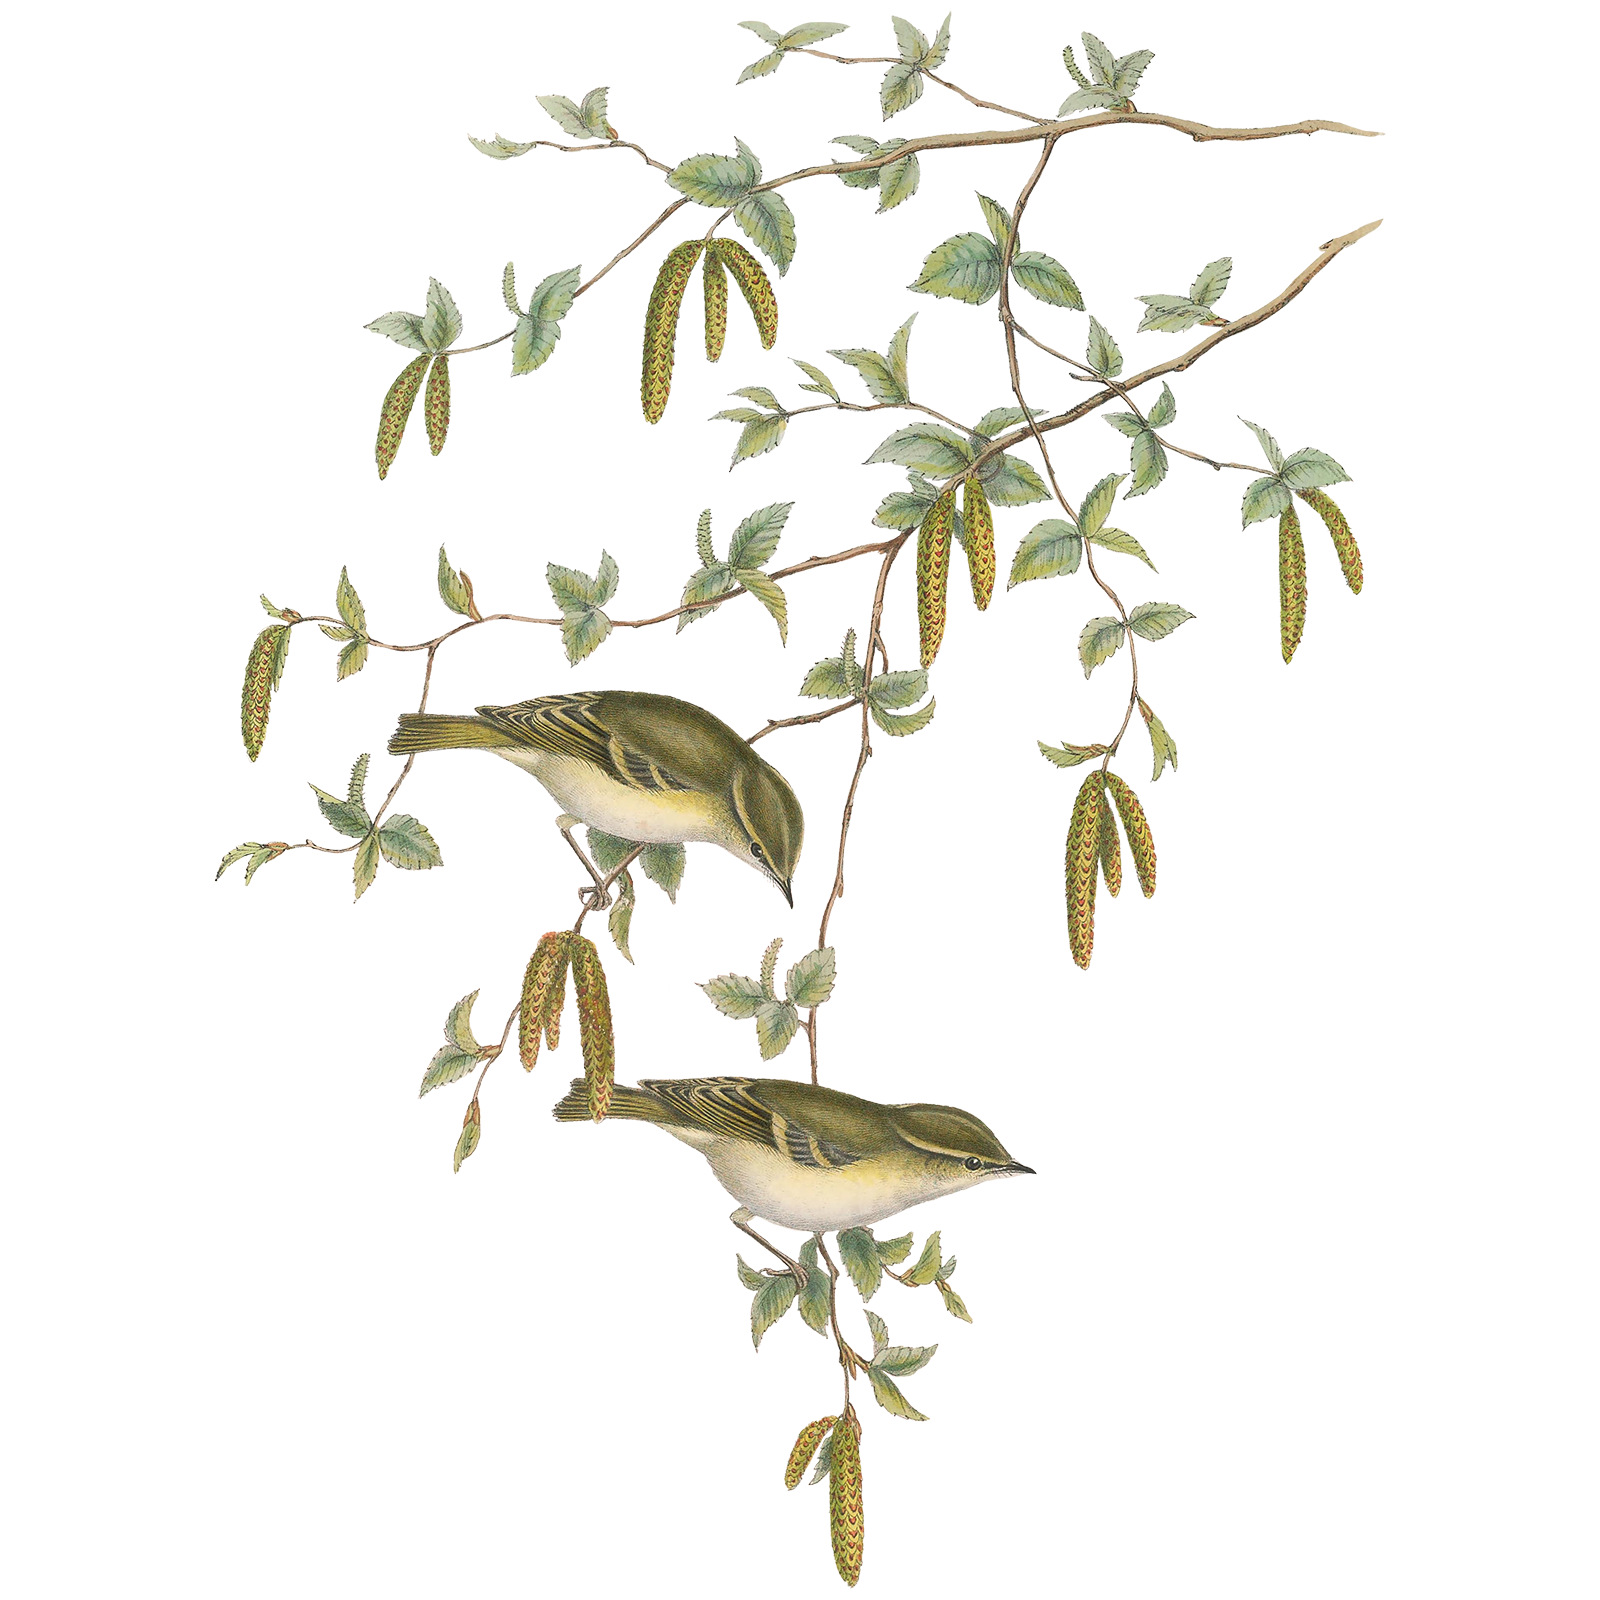 Illustration of two warblers in a branch.